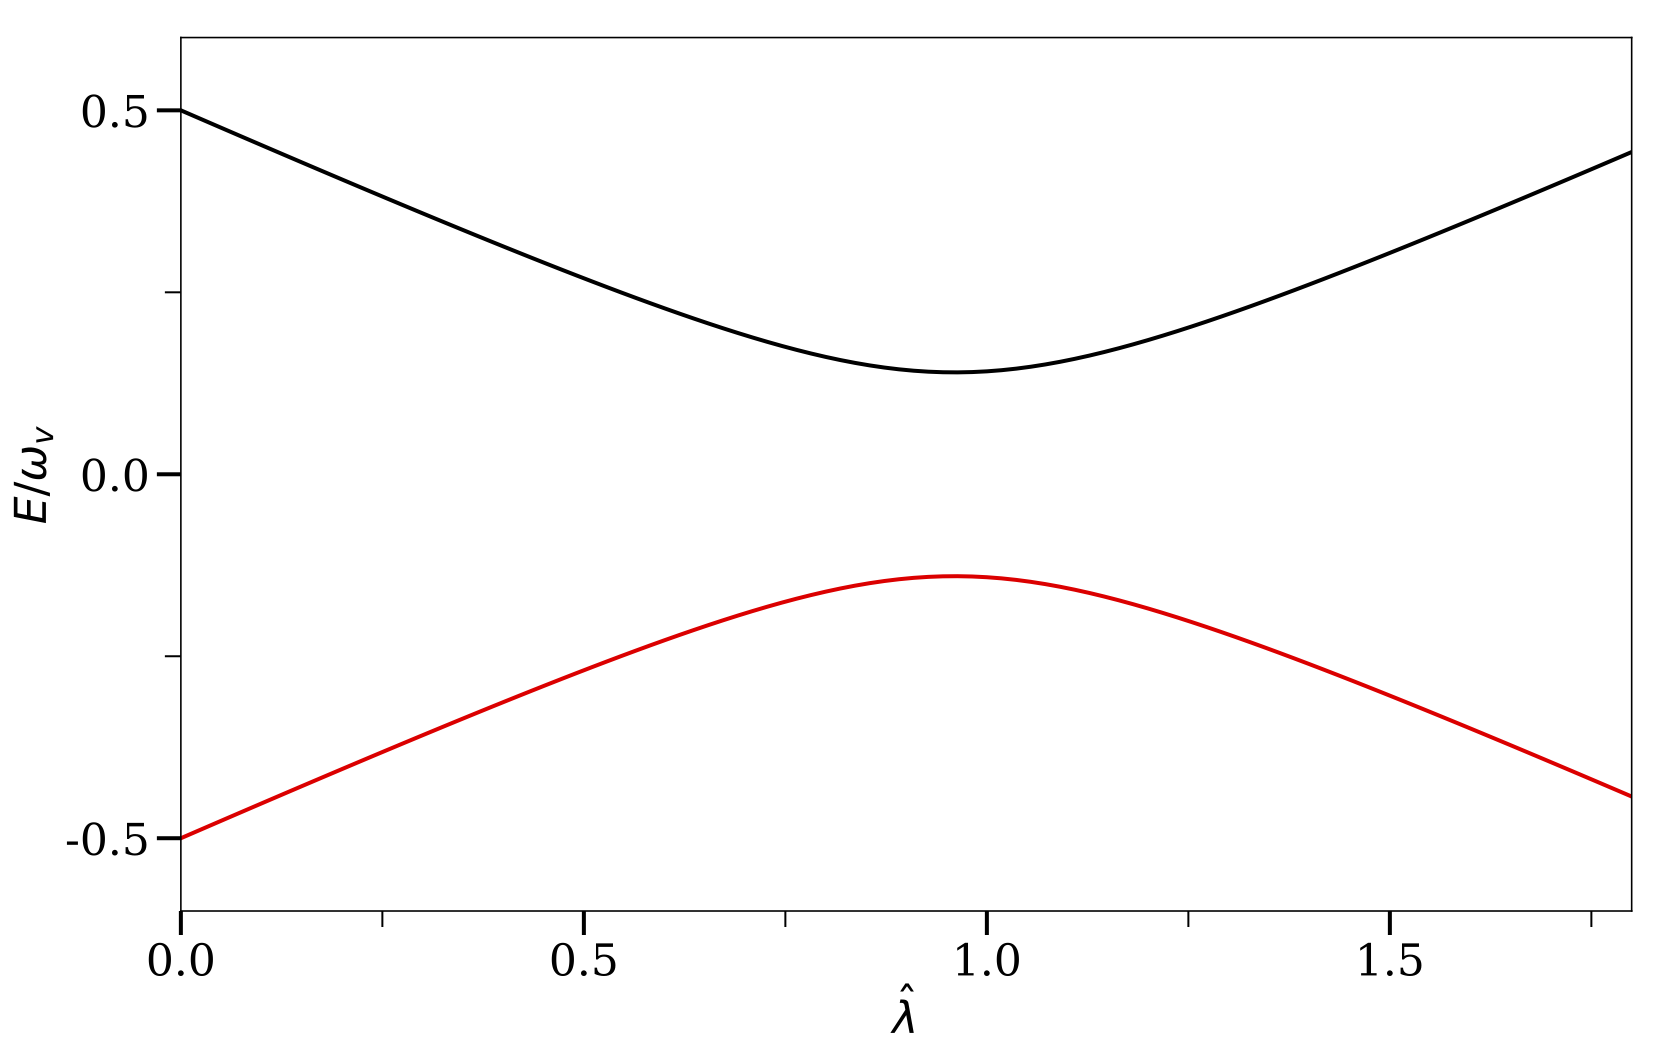 The two eigenvalues of the neutrino Hamiltonian as functions of matter potential $\hat\lambda$. I have used $\sin^2\theta_\vv = 0.02 \approx \sin^2 \theta_{13}$.